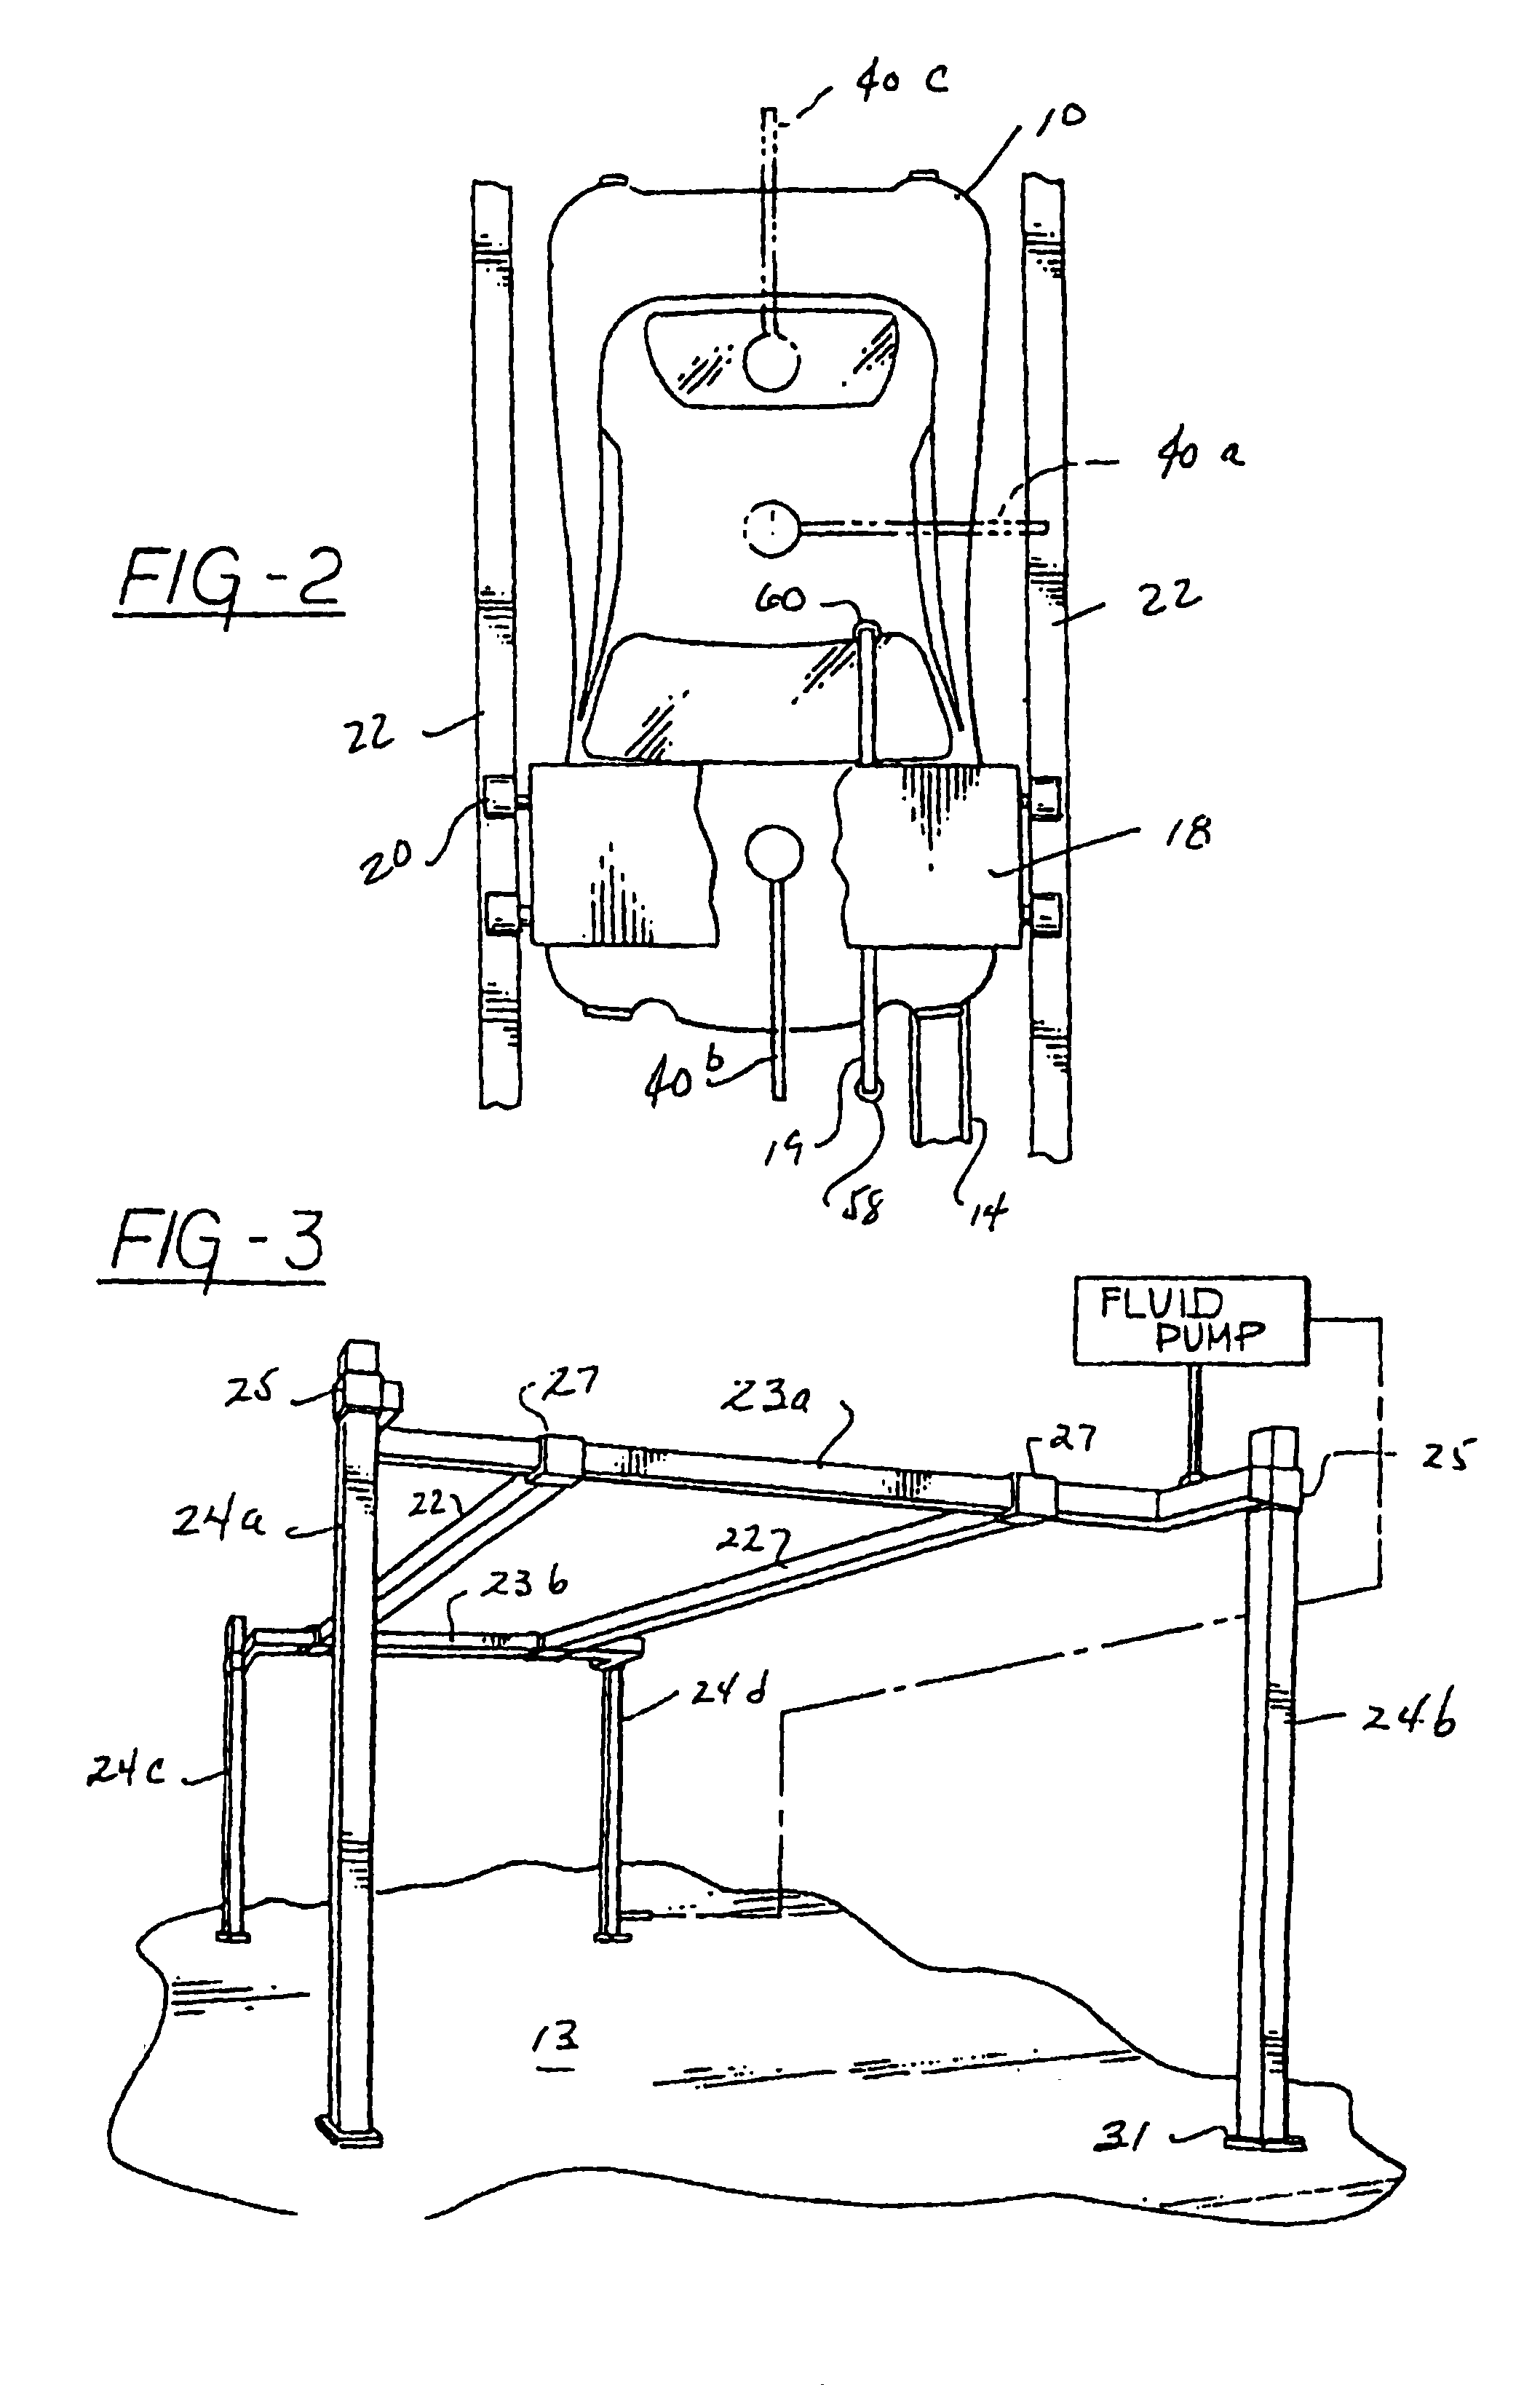 Rollover pressure car wash apparatus and methods of operating same